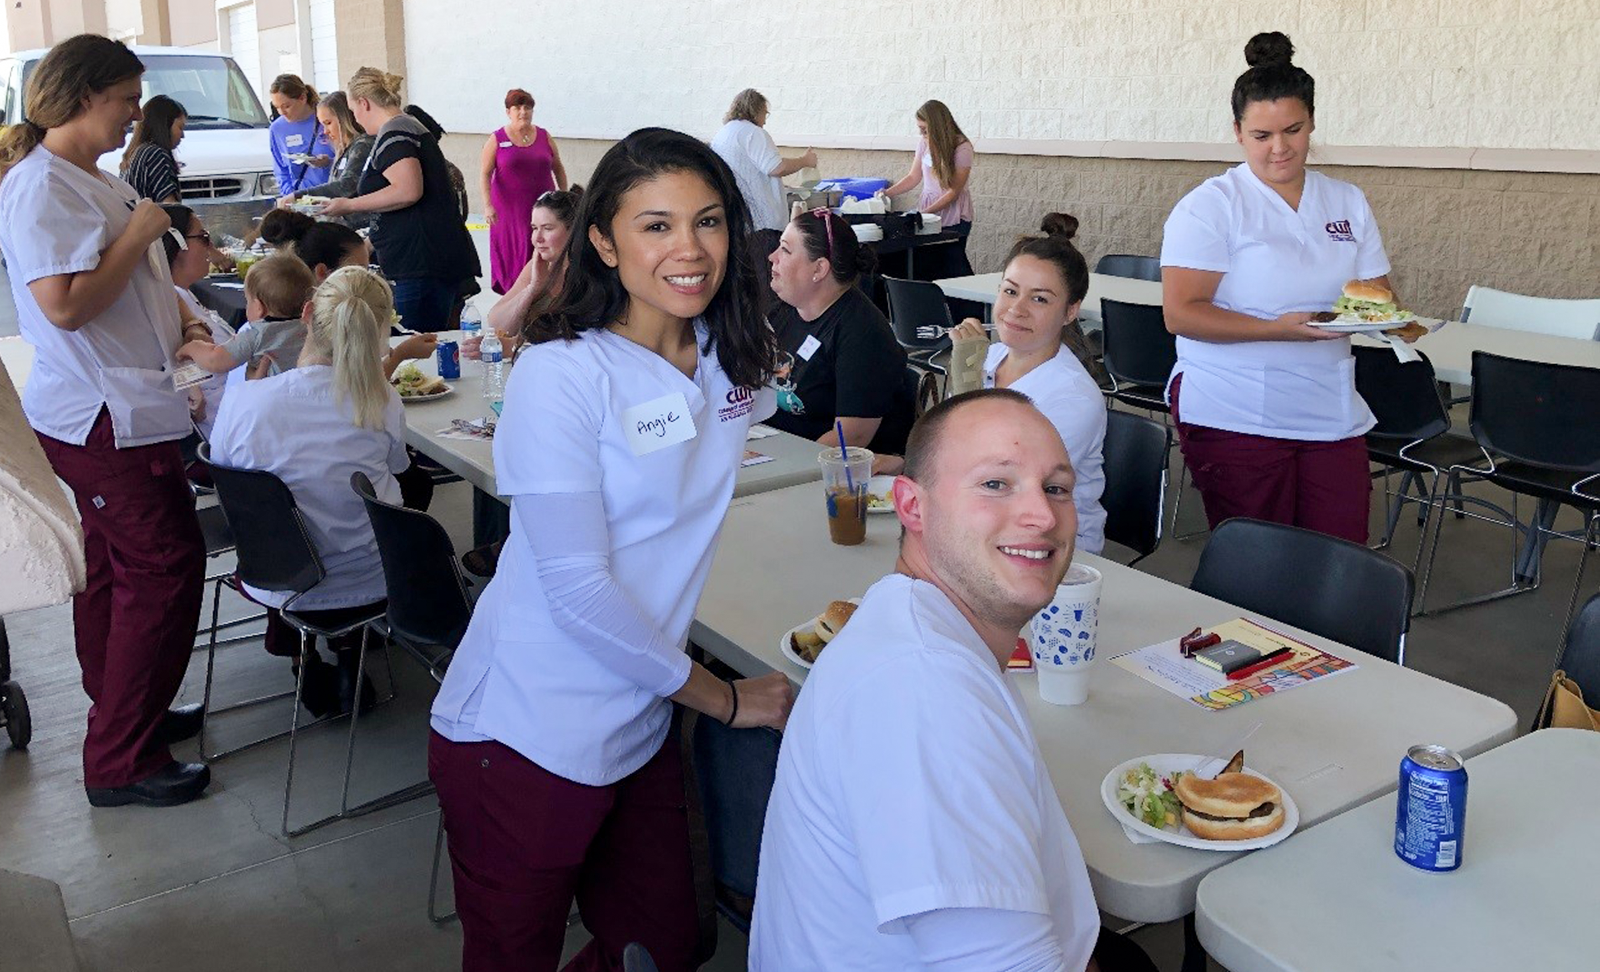 Students attending a barbecue hosted by Saint Alphonsus Aug. 27, 2019